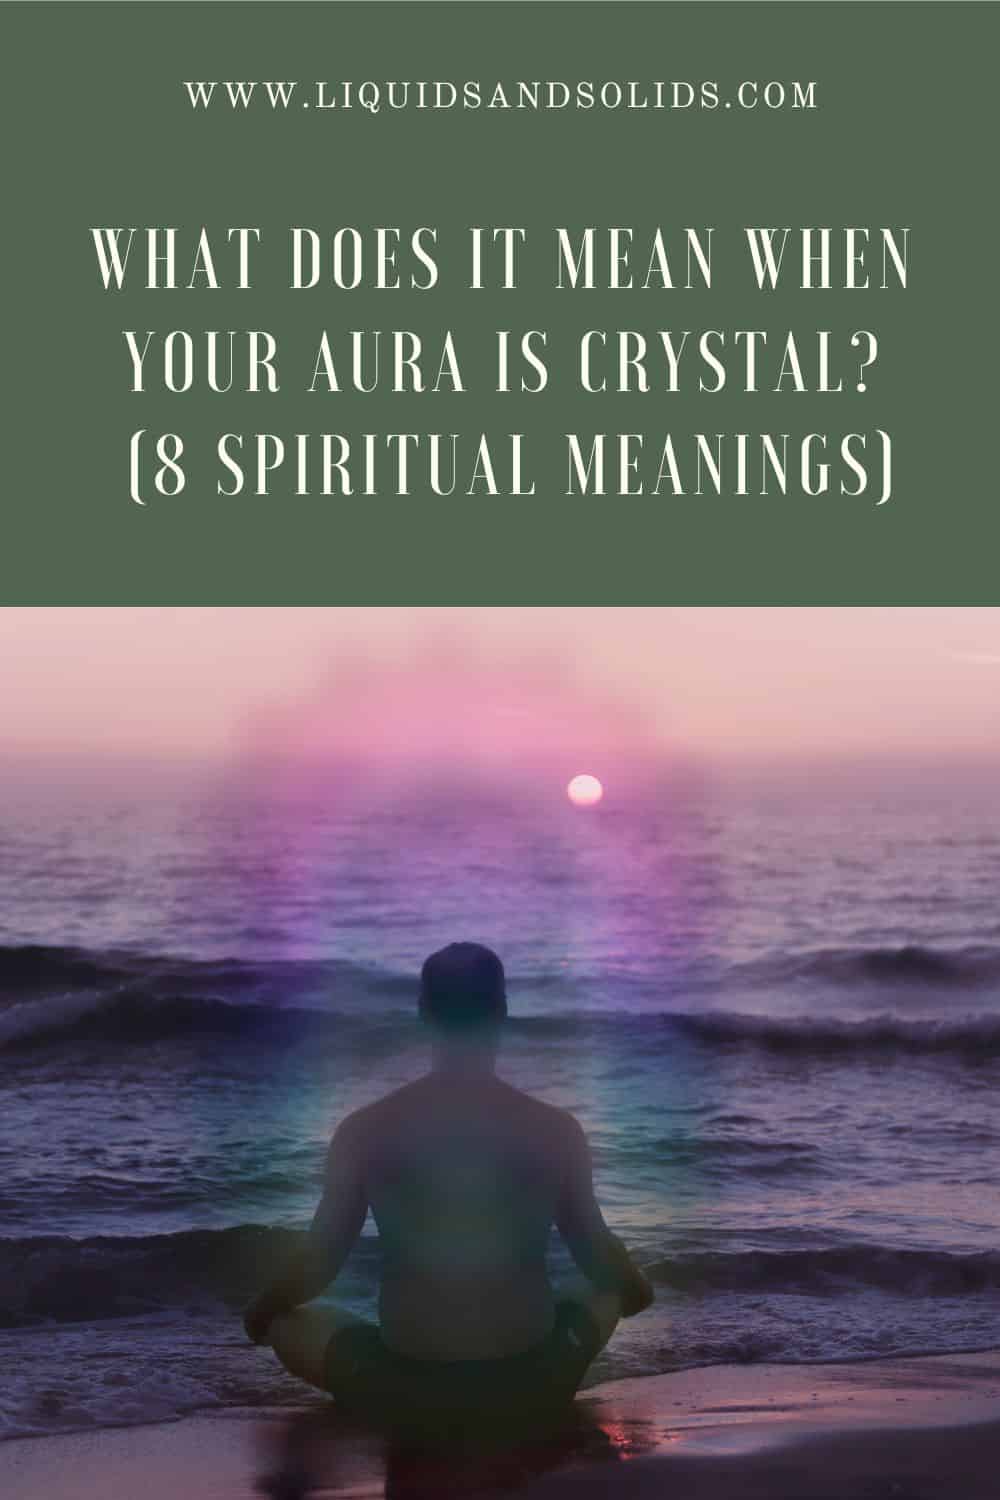 What Does It Mean When Your Aura Is Crystal? (8 Spiritual Meanings)